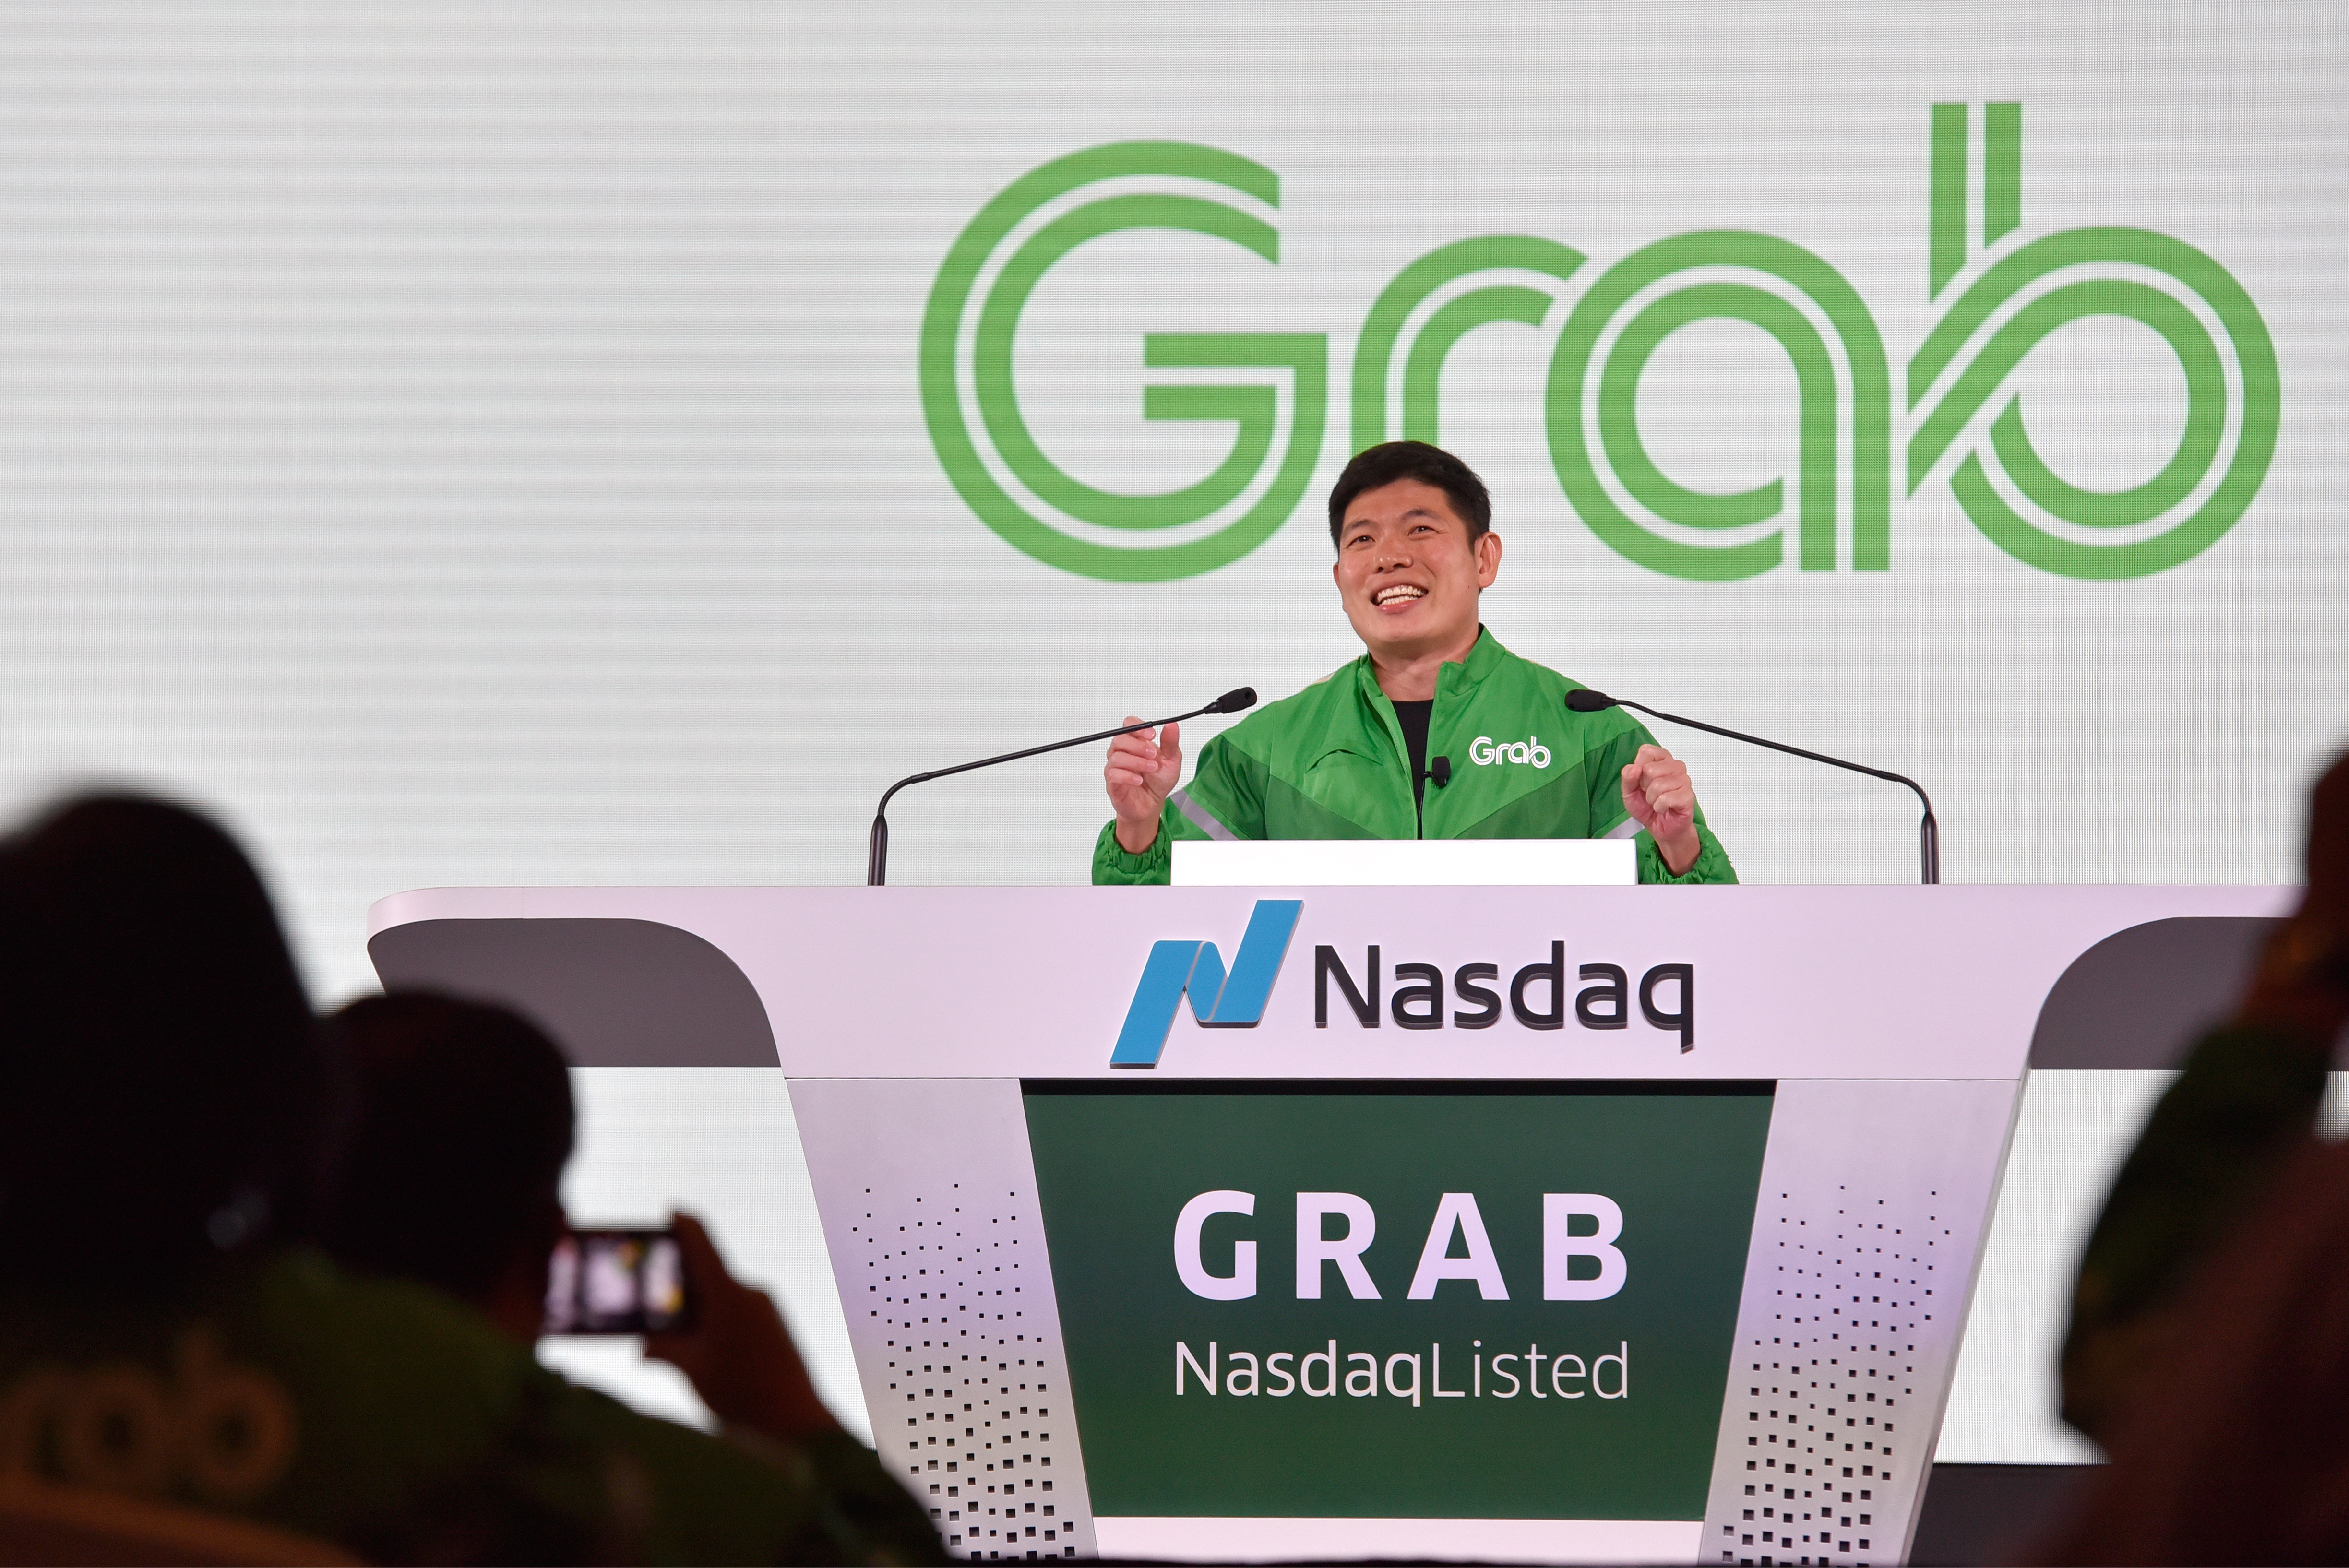 Grab's CEO Anthony Tan gives a speech before the Grab Bell Ringing Ceremony at a hotel in Singapore